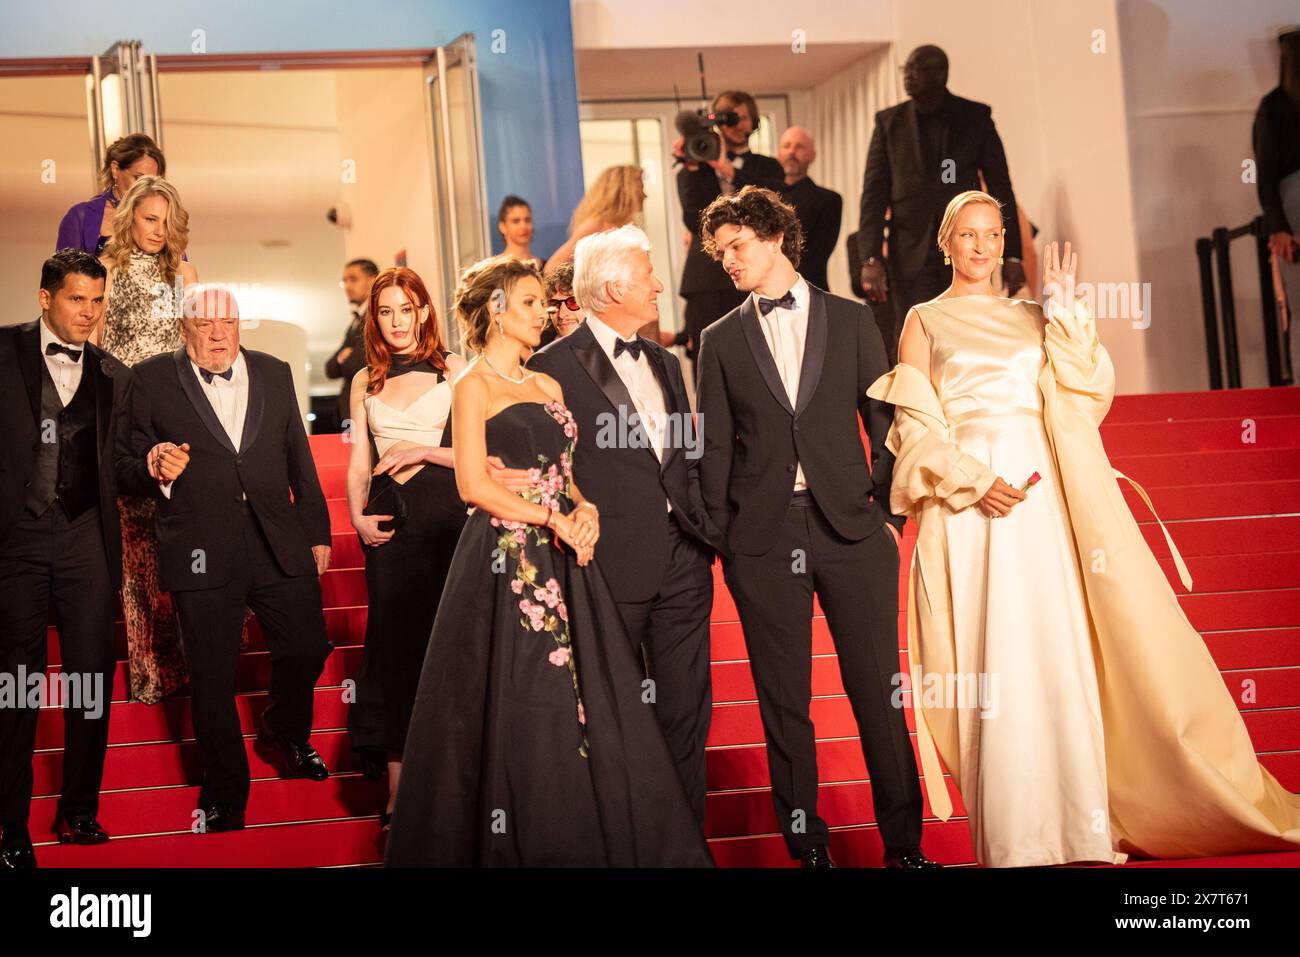 Cannes, France. 17th May, 2024. (L-R) Scott Lastaiti, Luisa Law, Tiffany Boyle, Andrew Wonder, Taylor Jeanne, Paul Schrader, Penelope Mitchell, Alejandra Silva, Richard Gere, Homer James Jigme Gere, Uma Thurman attend the 'Oh, Canada' Red Carpet at the 77th annual Cannes Film Festival at Palais des Festivals. (Photo by Loredana Sangiuliano/SOPA Images/Sipa USA) Credit: Sipa USA/Alamy Live News Stock Photo